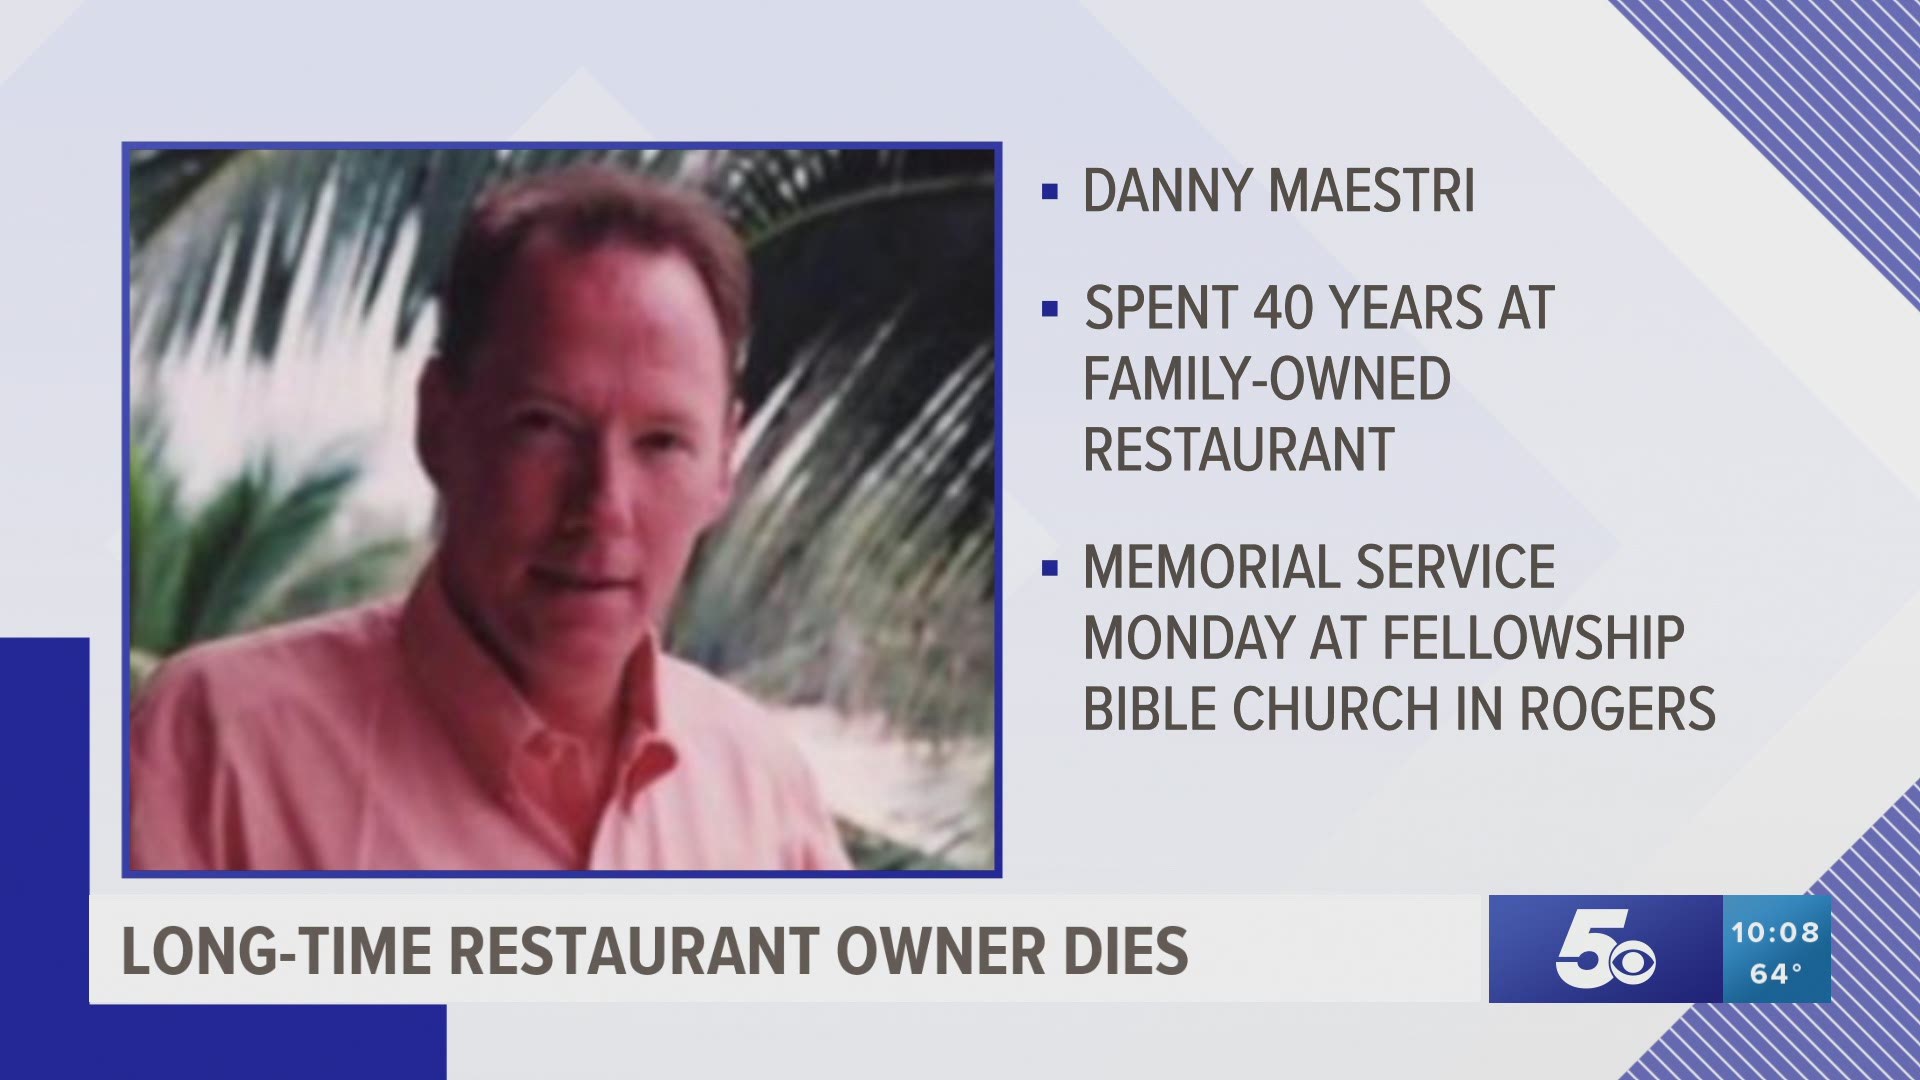 Danny Maestri died Friday after a long battle with congestive heart failure.